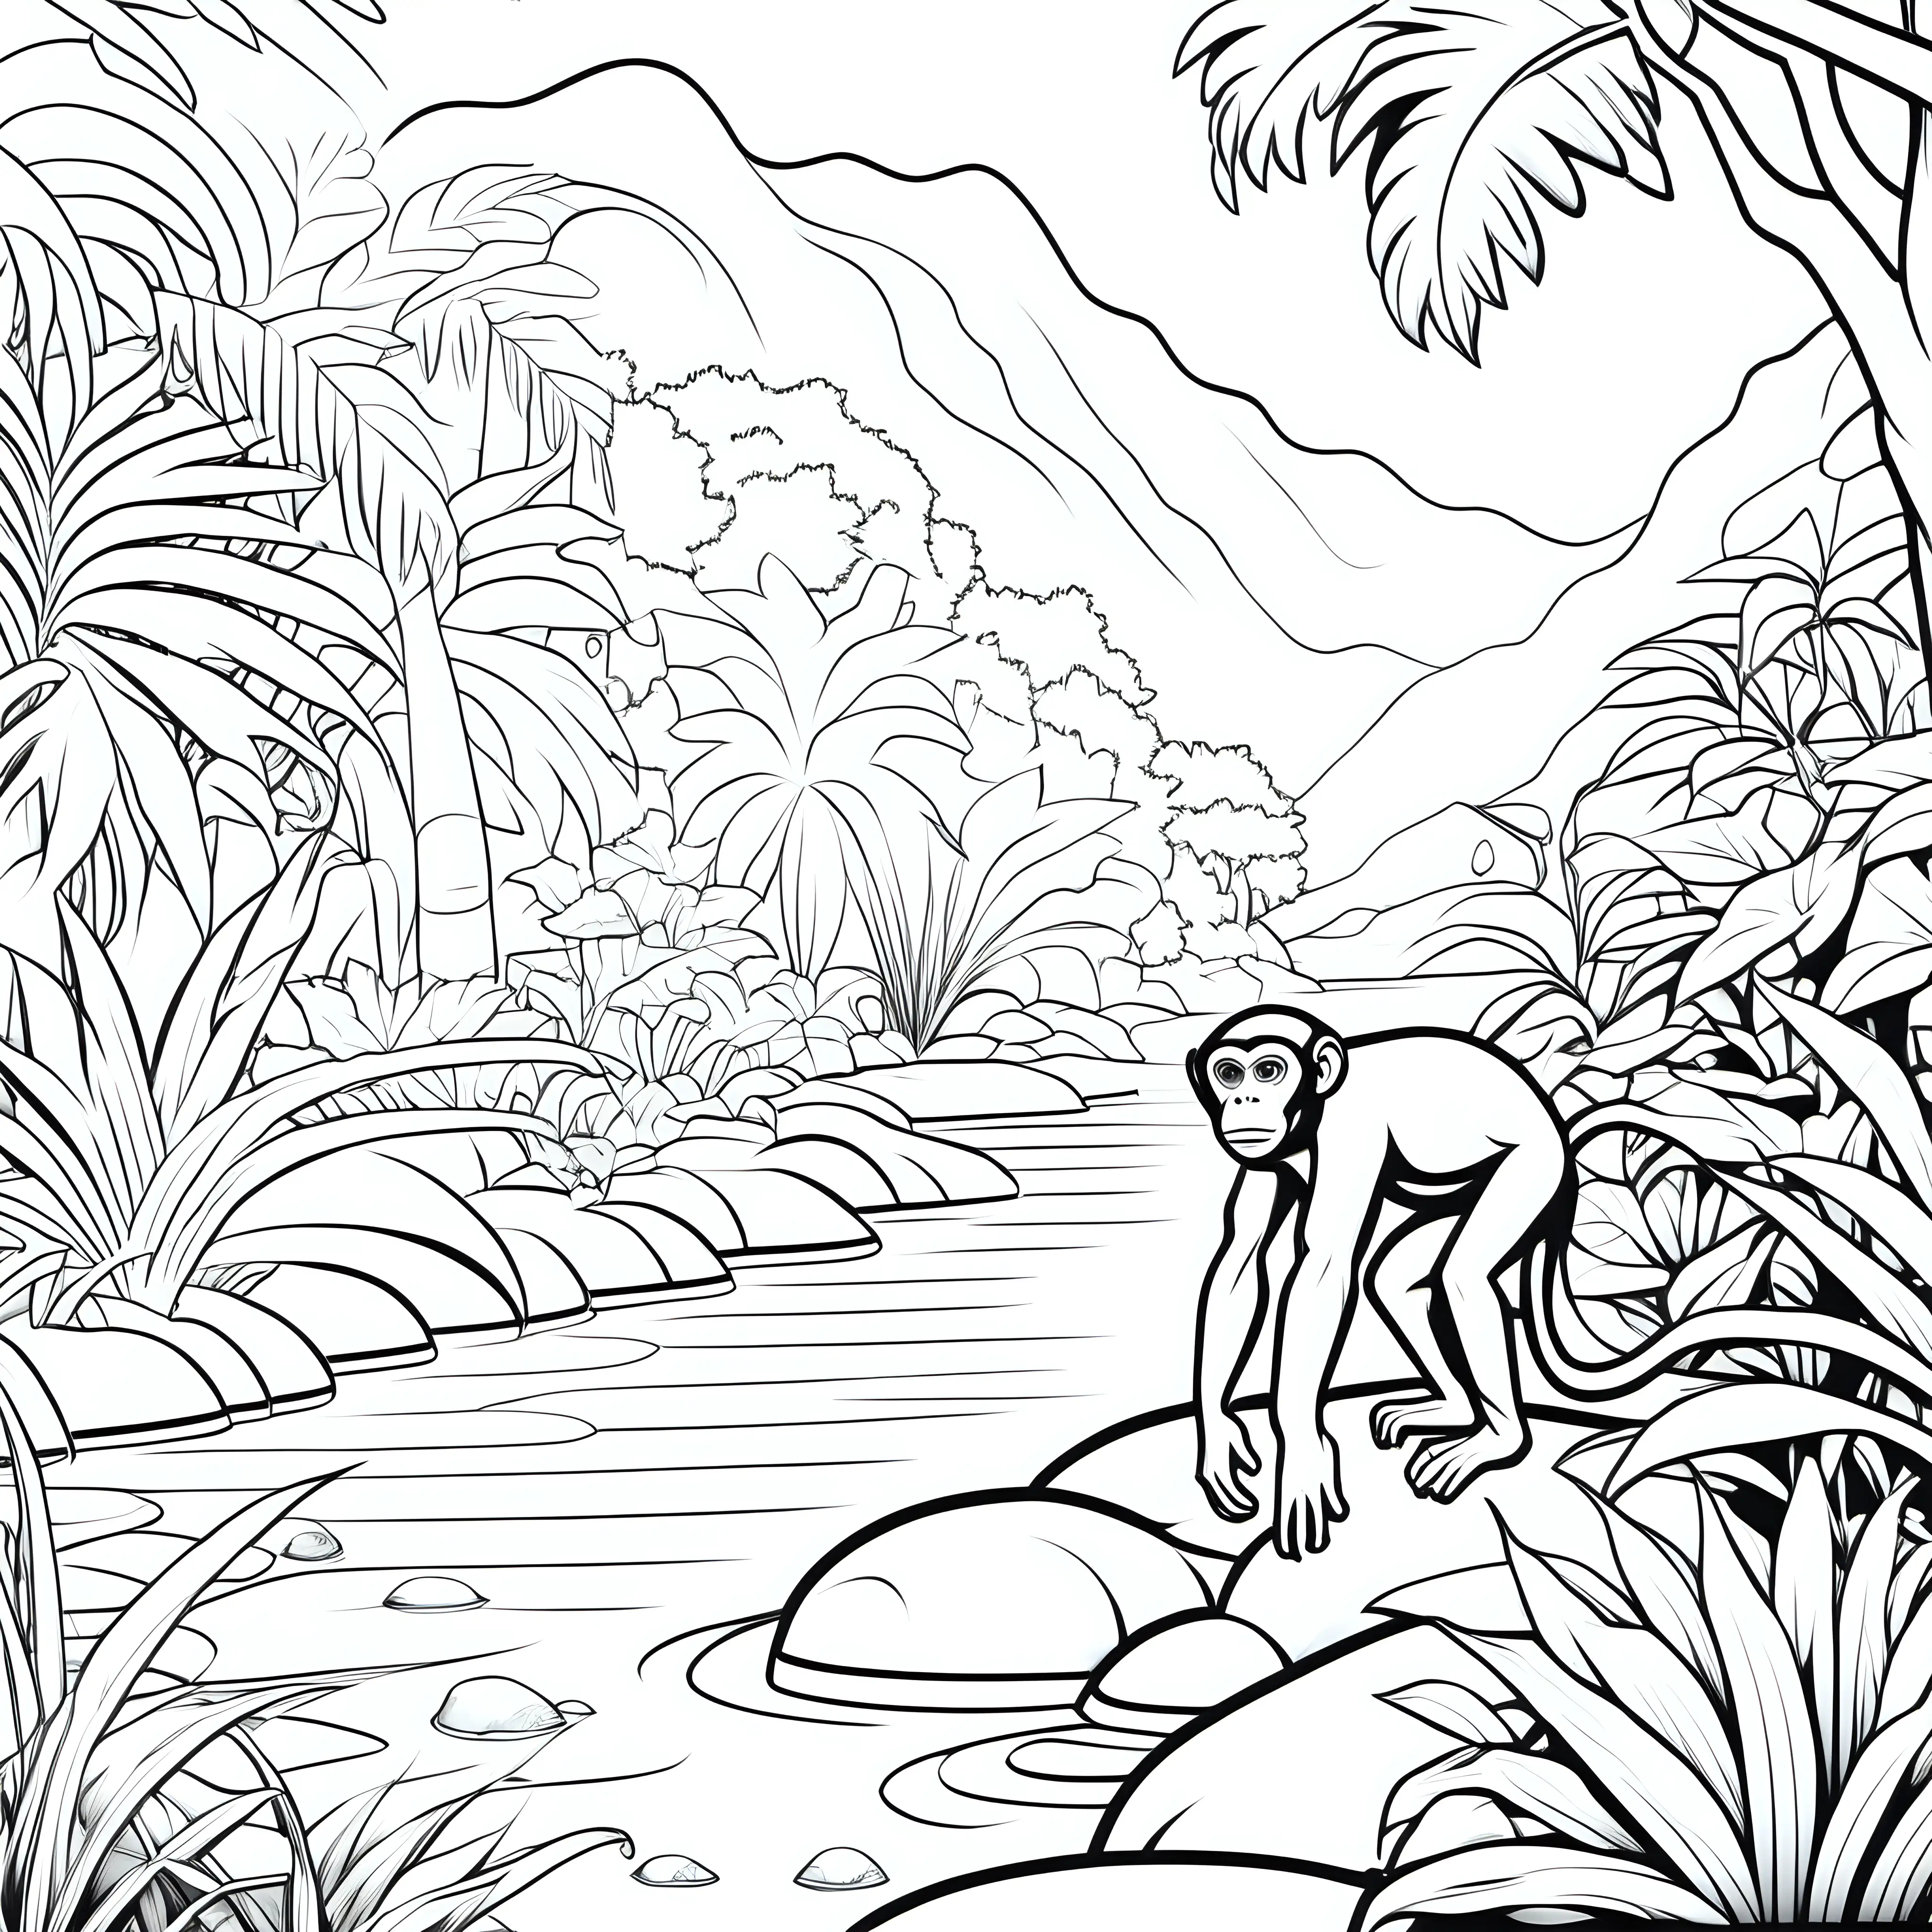 Adorable Monkey Coloring Page in the Serene Garden of Eden